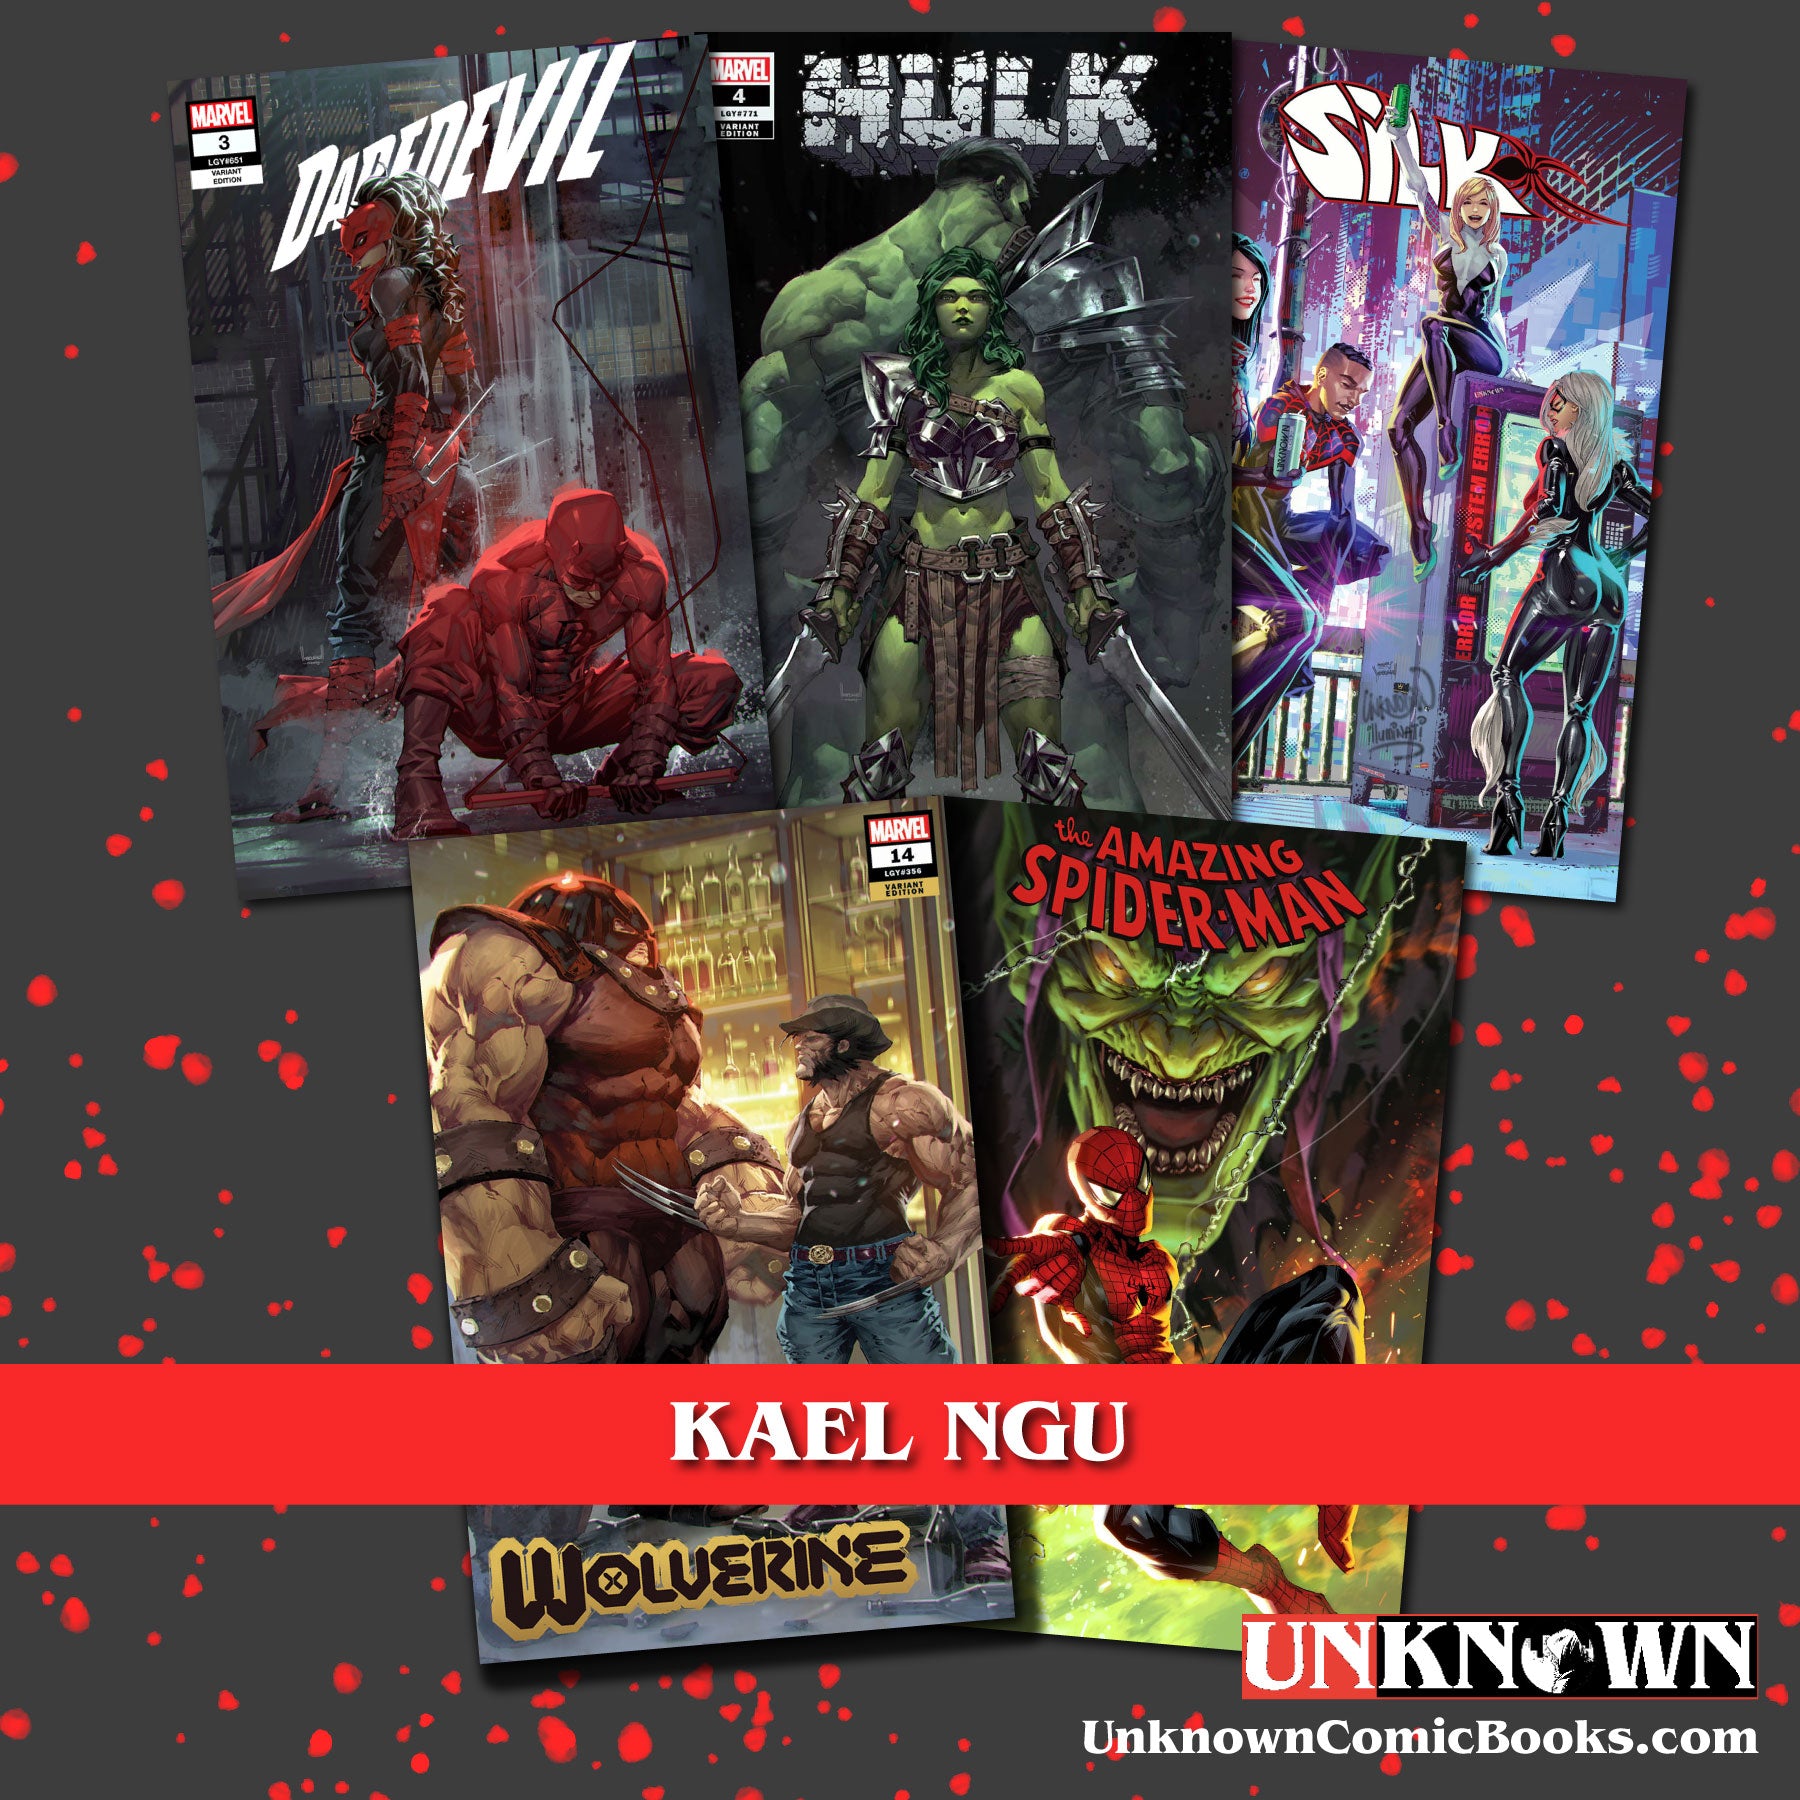 [5 PACK] UNKNOWN COMICS MYSTERY THEMED 👉🎨KAEL NGU ARTIST EXCLUSIVE BOX 👉TRADE (12/21/2022)